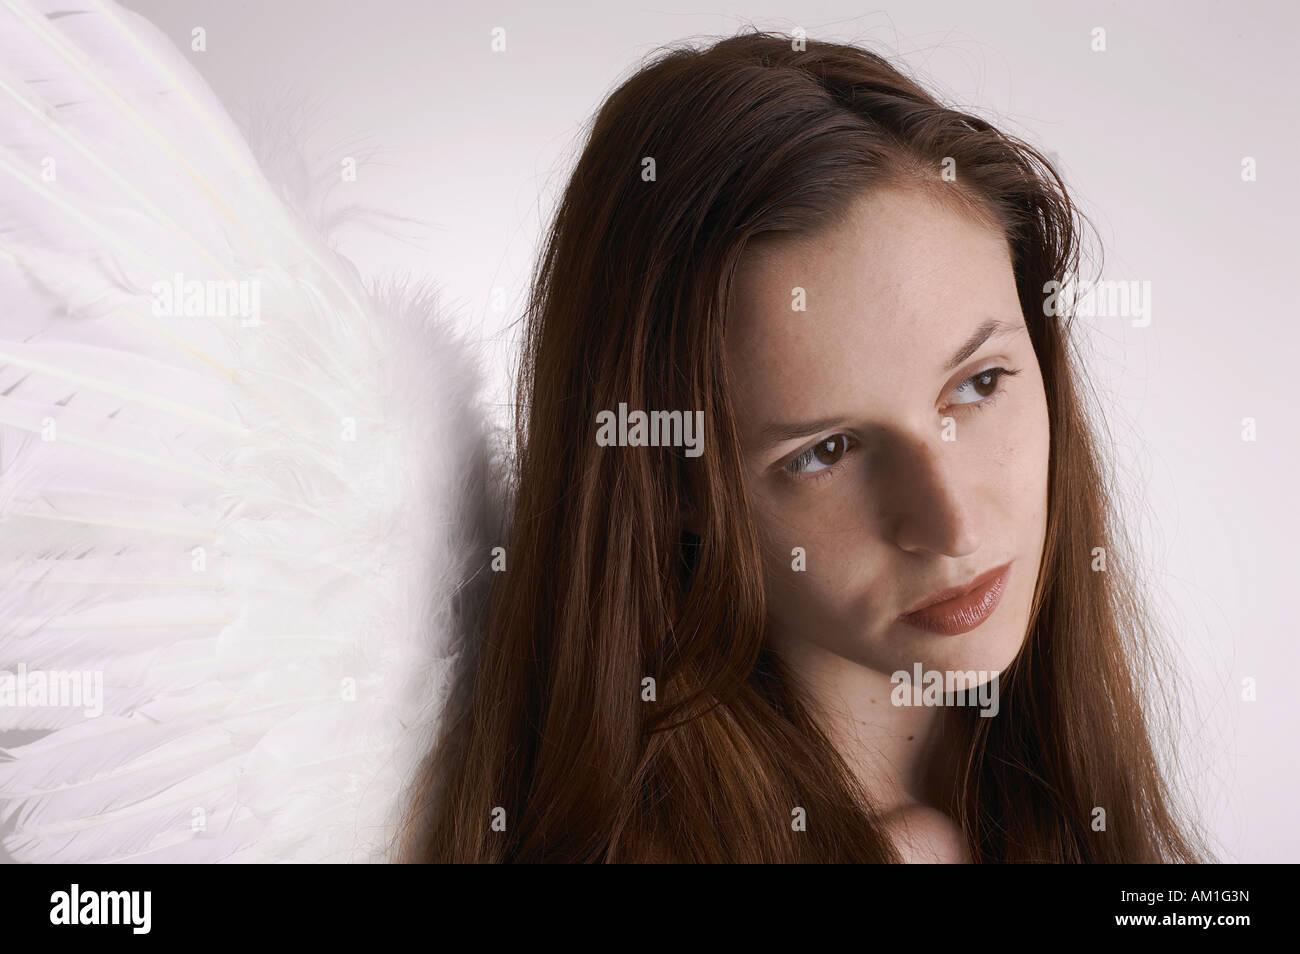 Portrait of an angel with brown eyes and hair Stock Photo